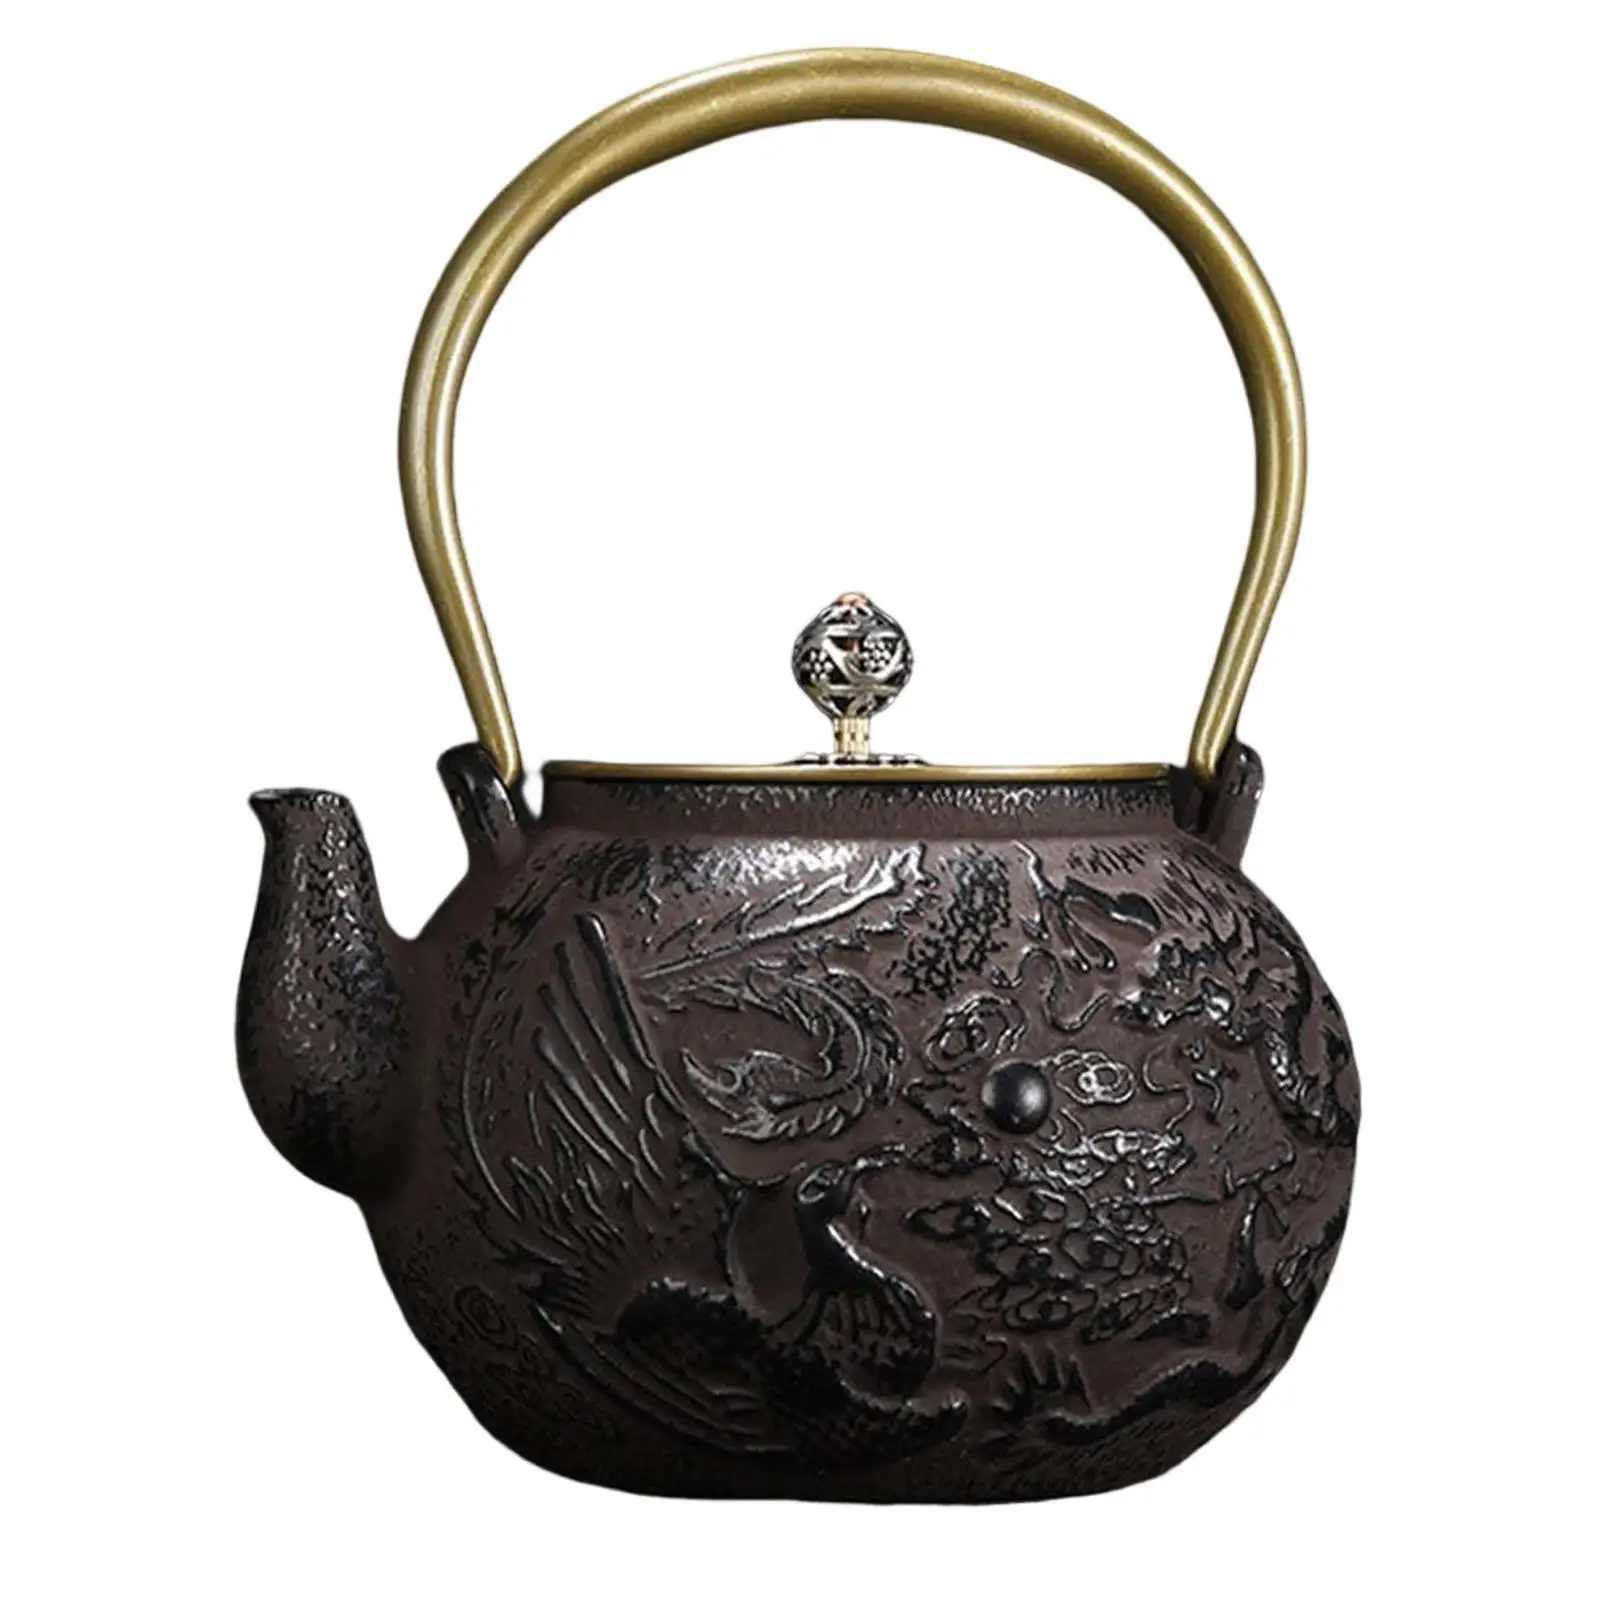 Chinese Cast Iron Teapot 1300ml Tea Kettle Exquisite Crafts Sturdy Kitchen Decoration Parent Gift Practical Handmade